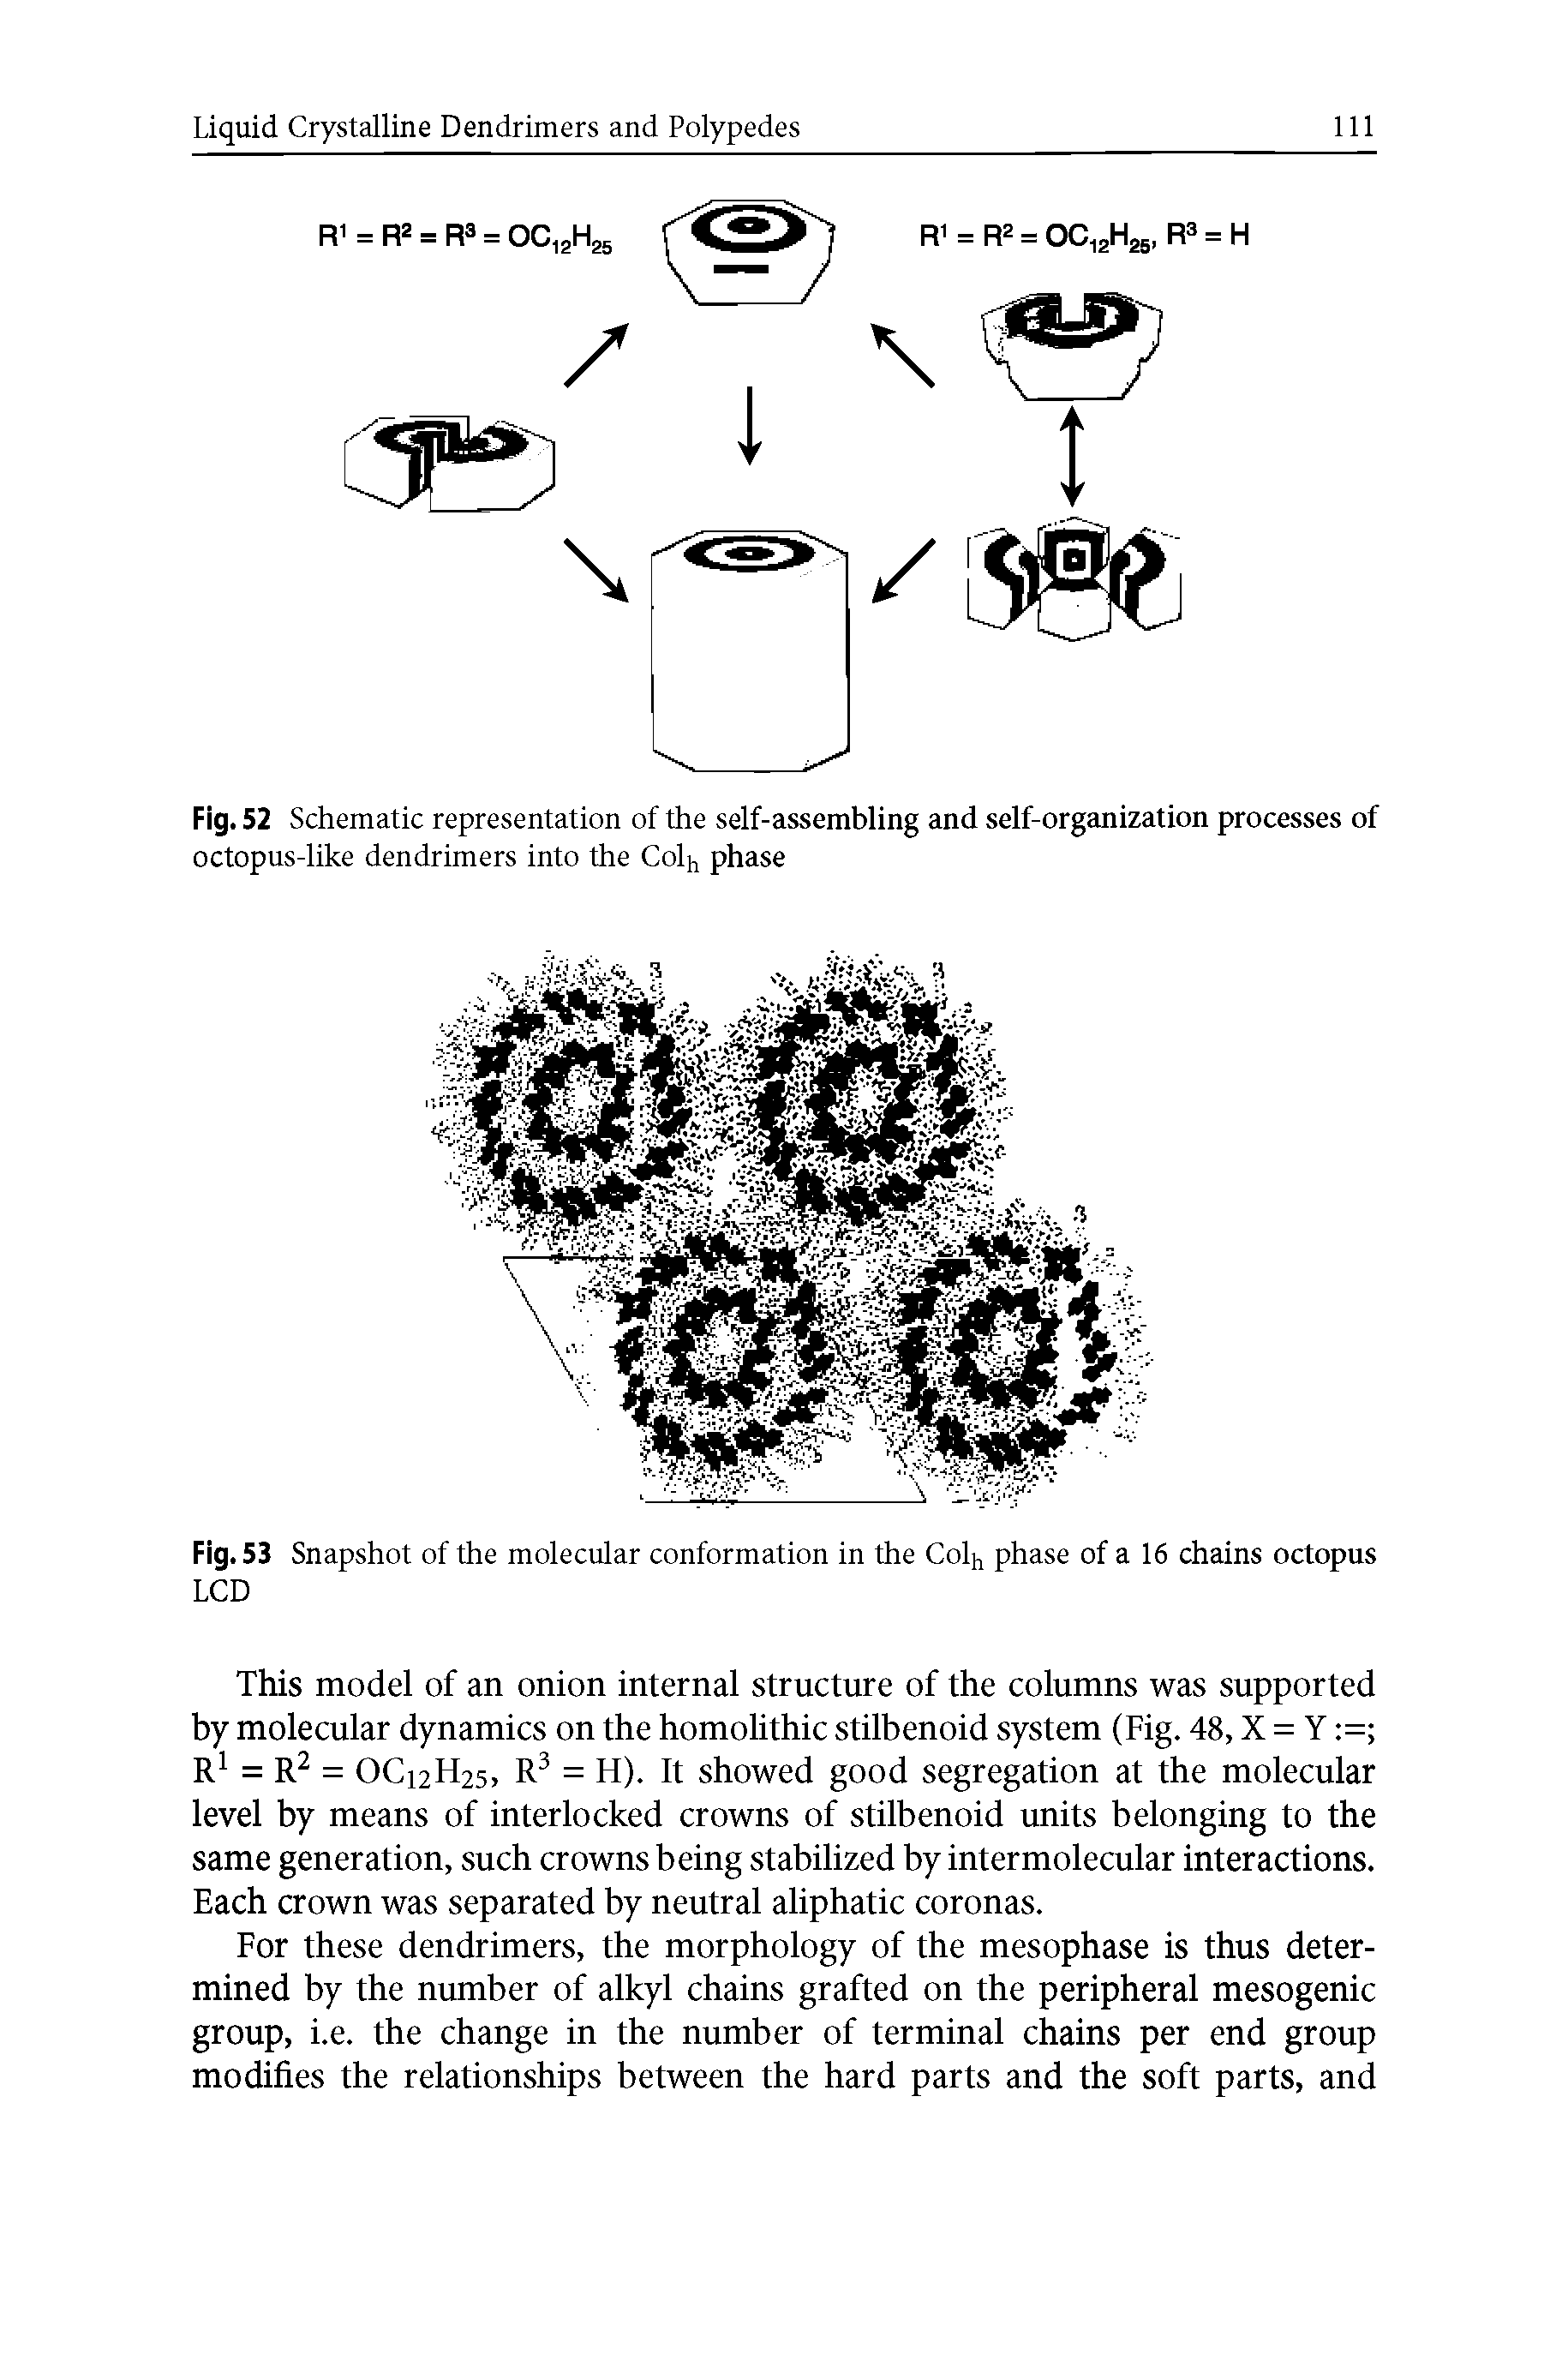 Fig. 52 Schematic representation of the self-assembling and self-organization processes of octopus-like dendrimers into the Colh phase...